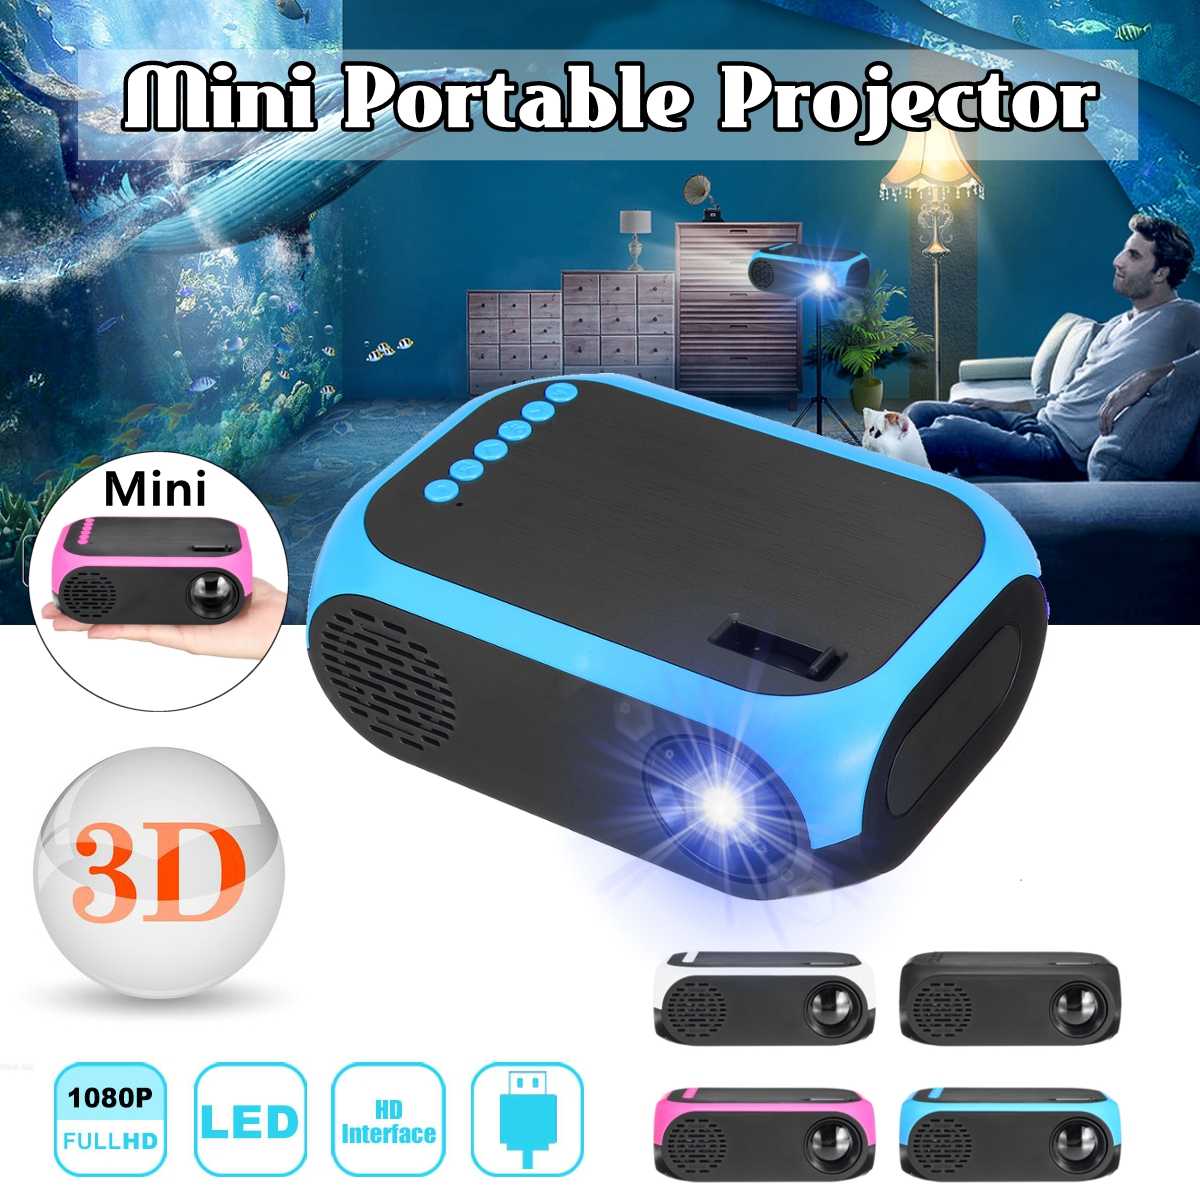 Mini Projector 1080 p HD USB TF Ondersteuning 3D MP4 Draagbare Cinema Projector Thuisbioscoop Systeem Movie Projector